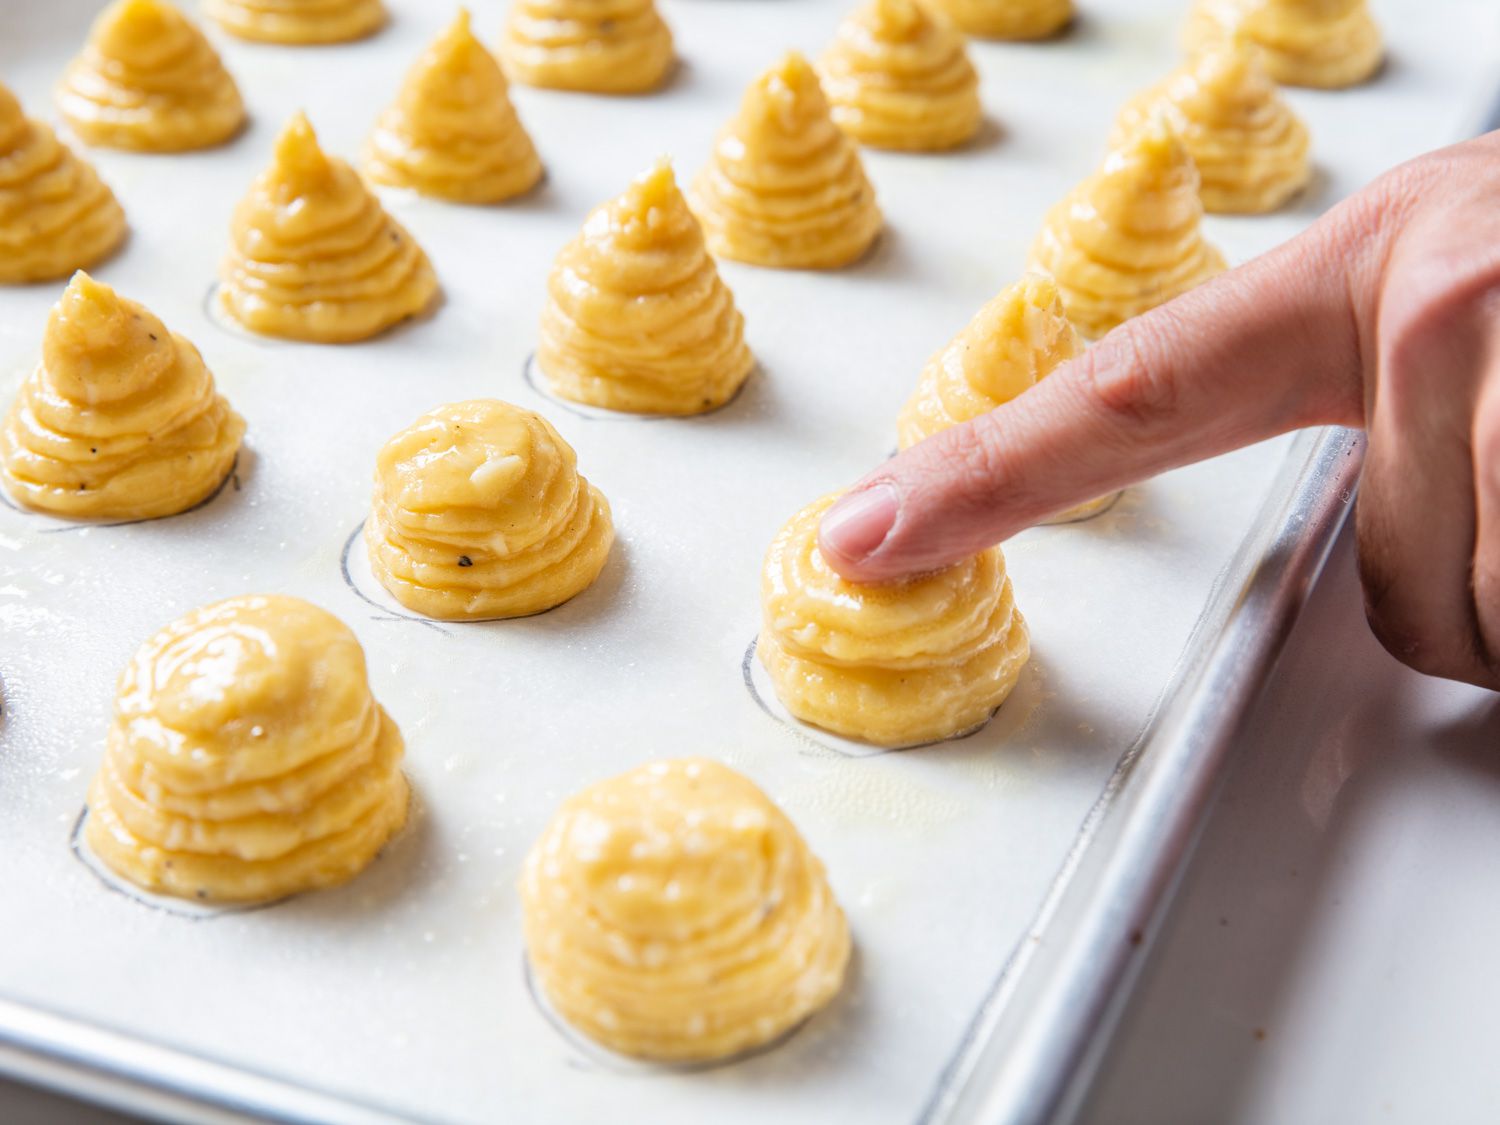 A moist finger press down on the piped mounds of choux paste.